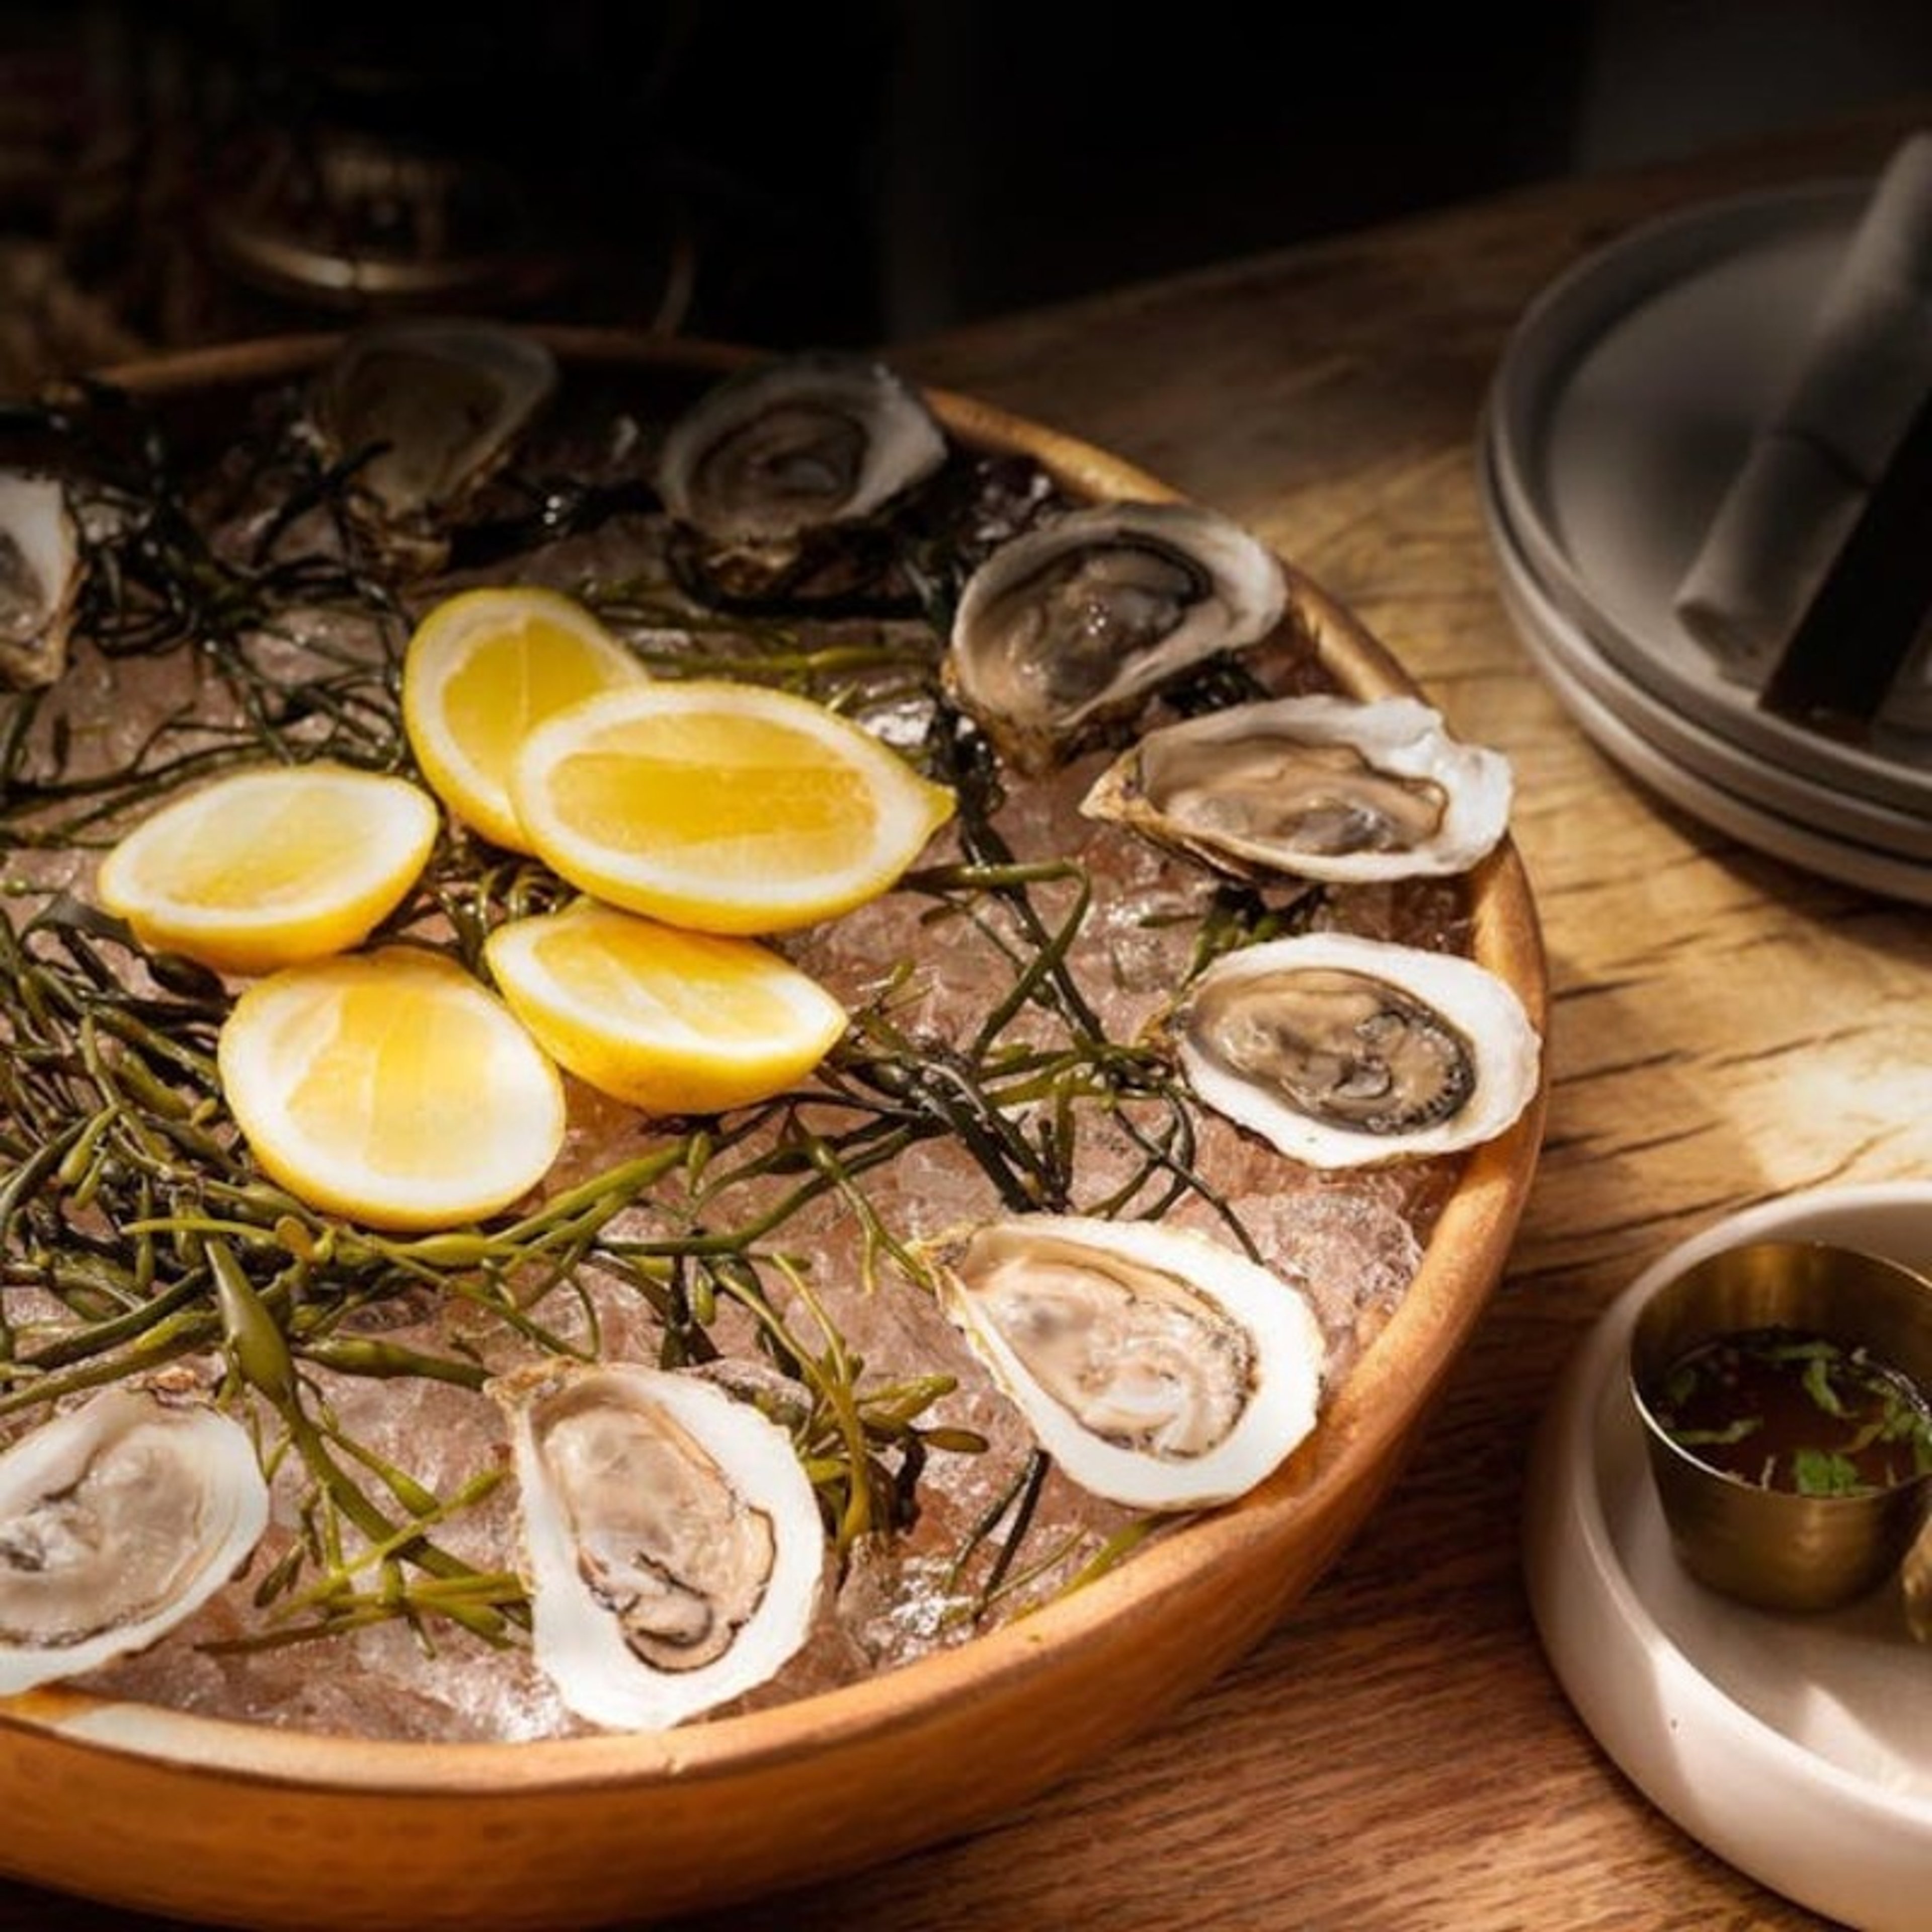 A plate of oysters, with sliced lemons in the middle